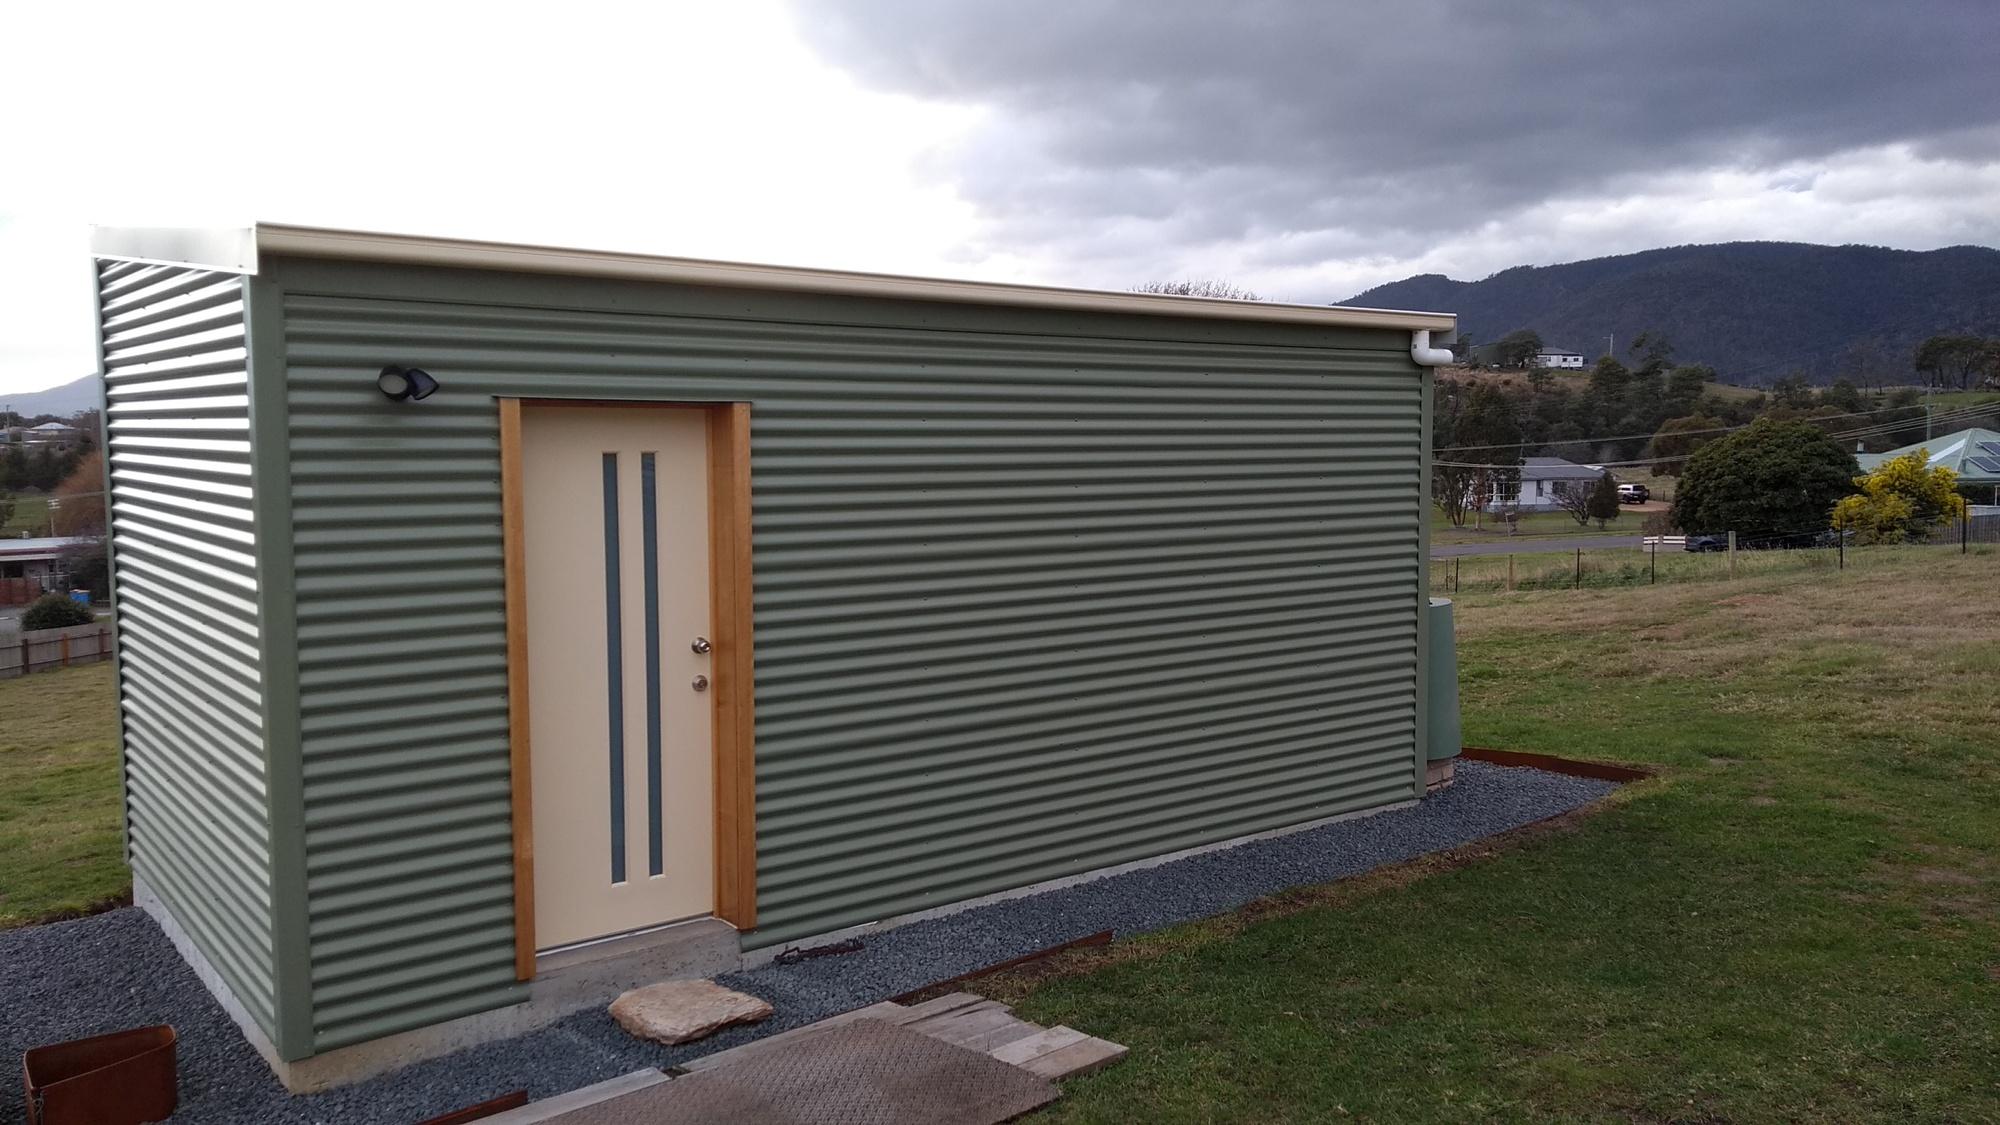 Sue from Fingal, TAS loves COLORBOND® steel. Roofing, Guttering & Fascia, Walling made from COLORBOND® steel in colour Classic Cream™ and Pale Eucalypt®